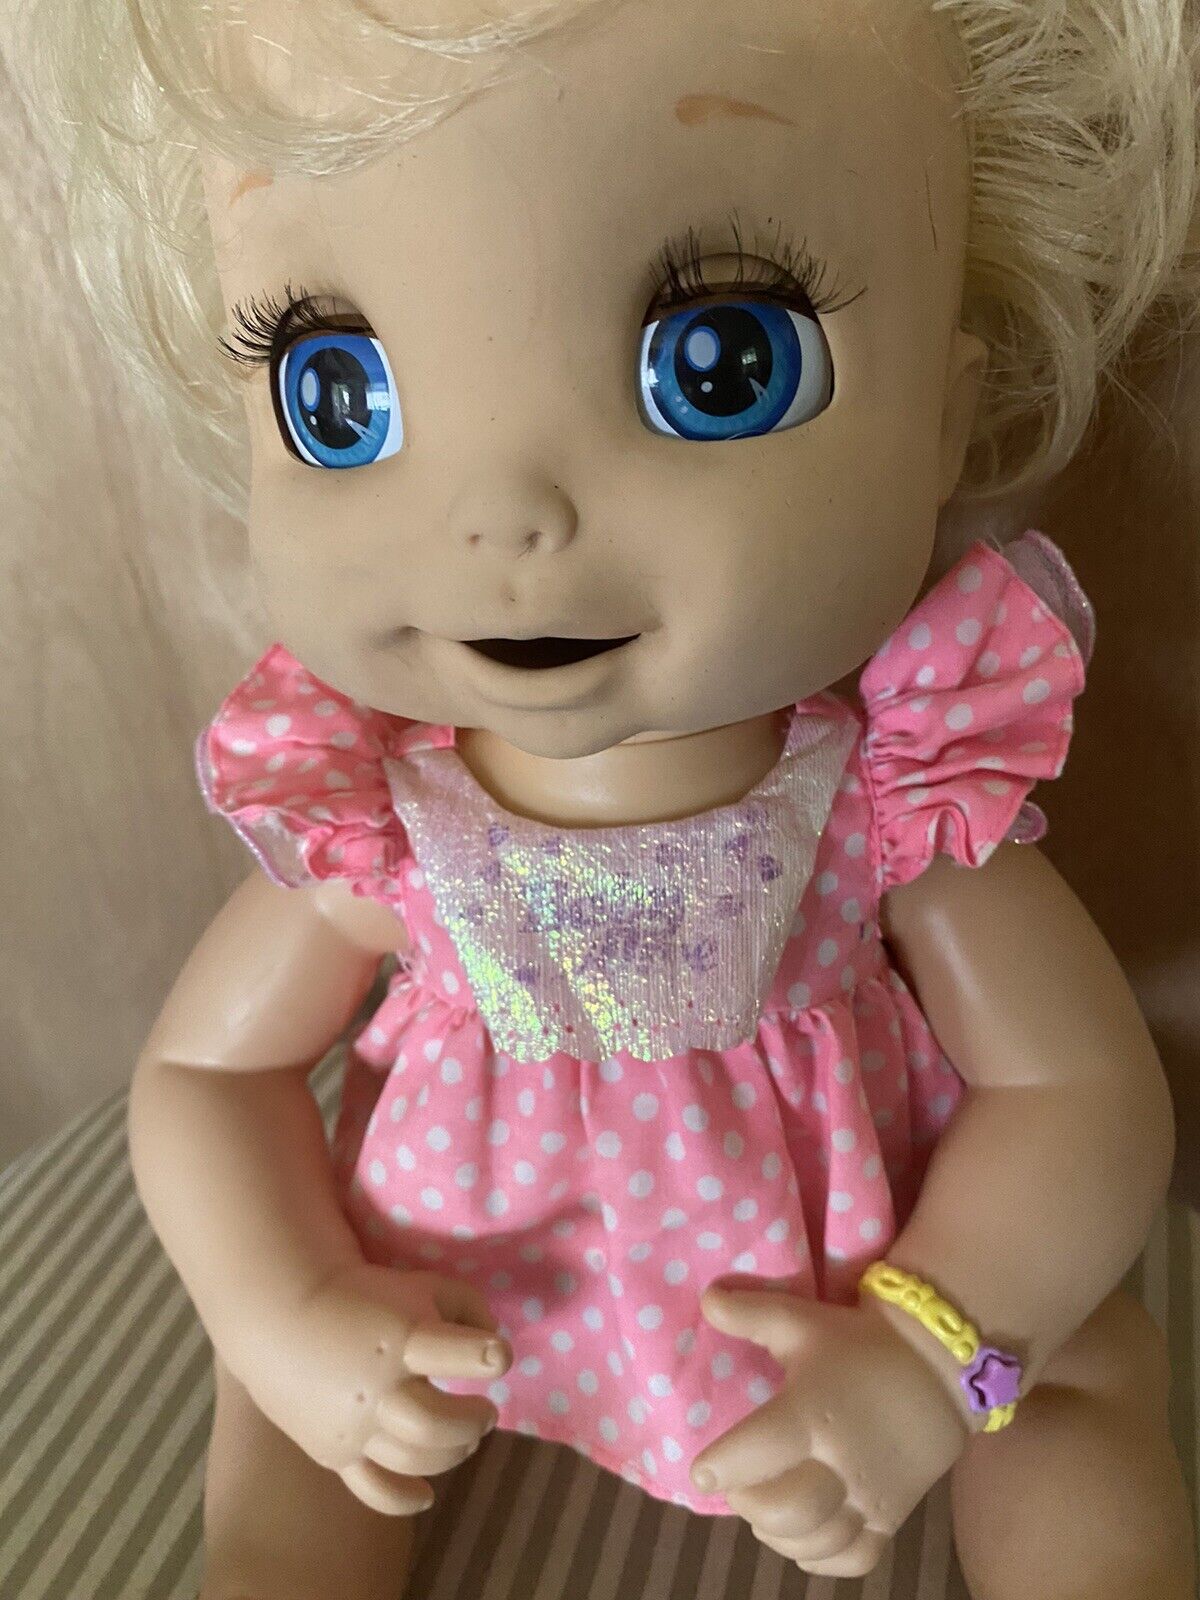 2006    HASBRO INTERACTIVE BABY ALIVE DOLL SOFT FACE   WORKS